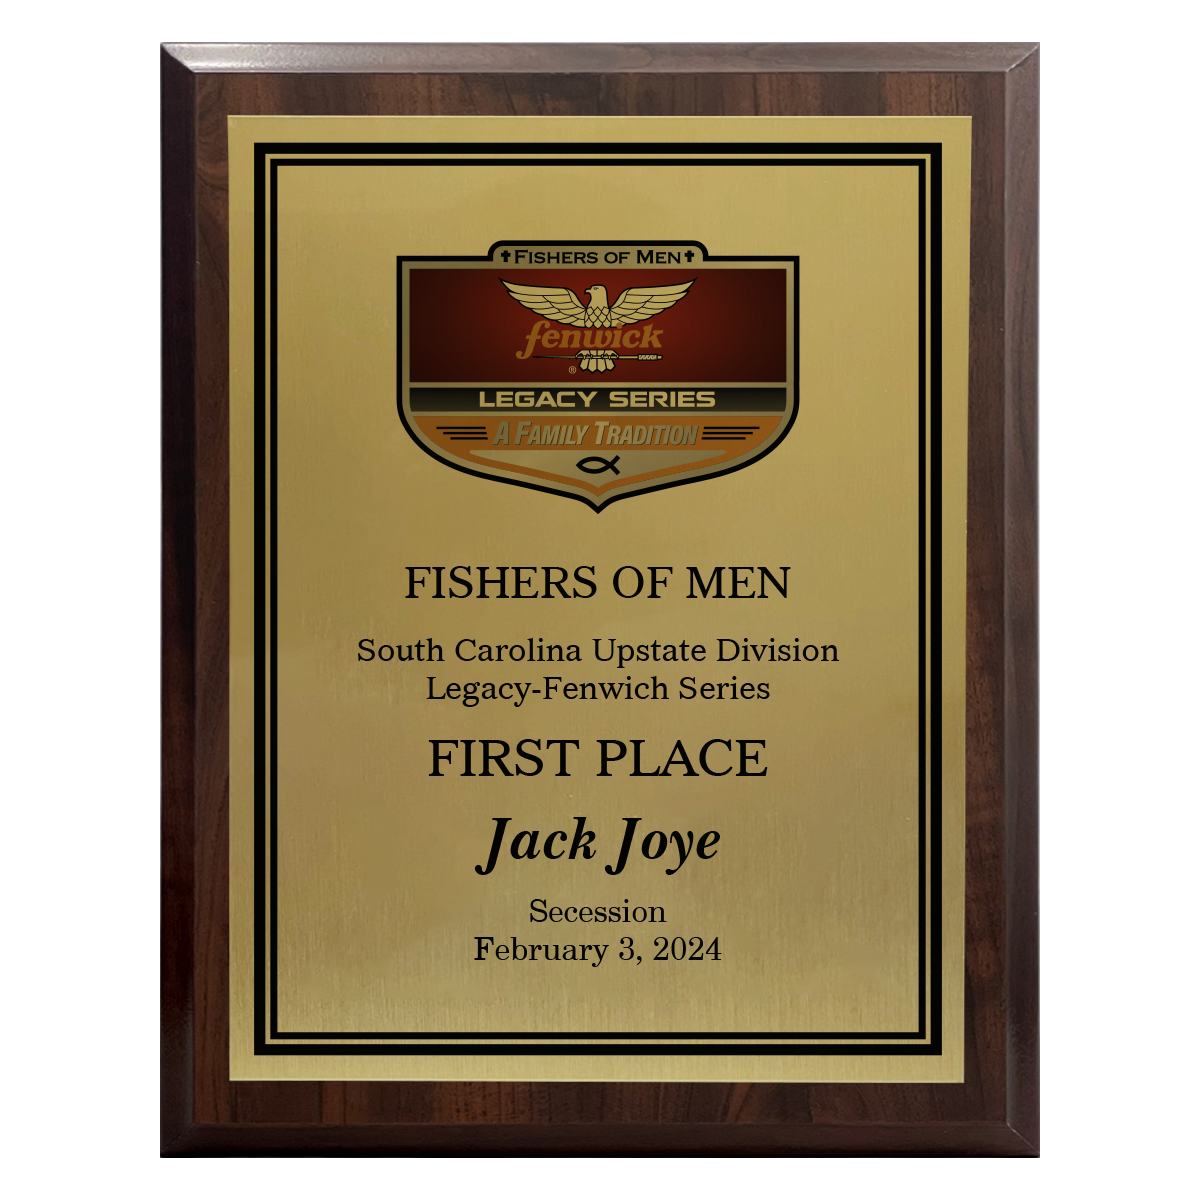 100 Series Plaque in Black, Cherry or Walnut Finish Board with Full Color Sublimated Plate